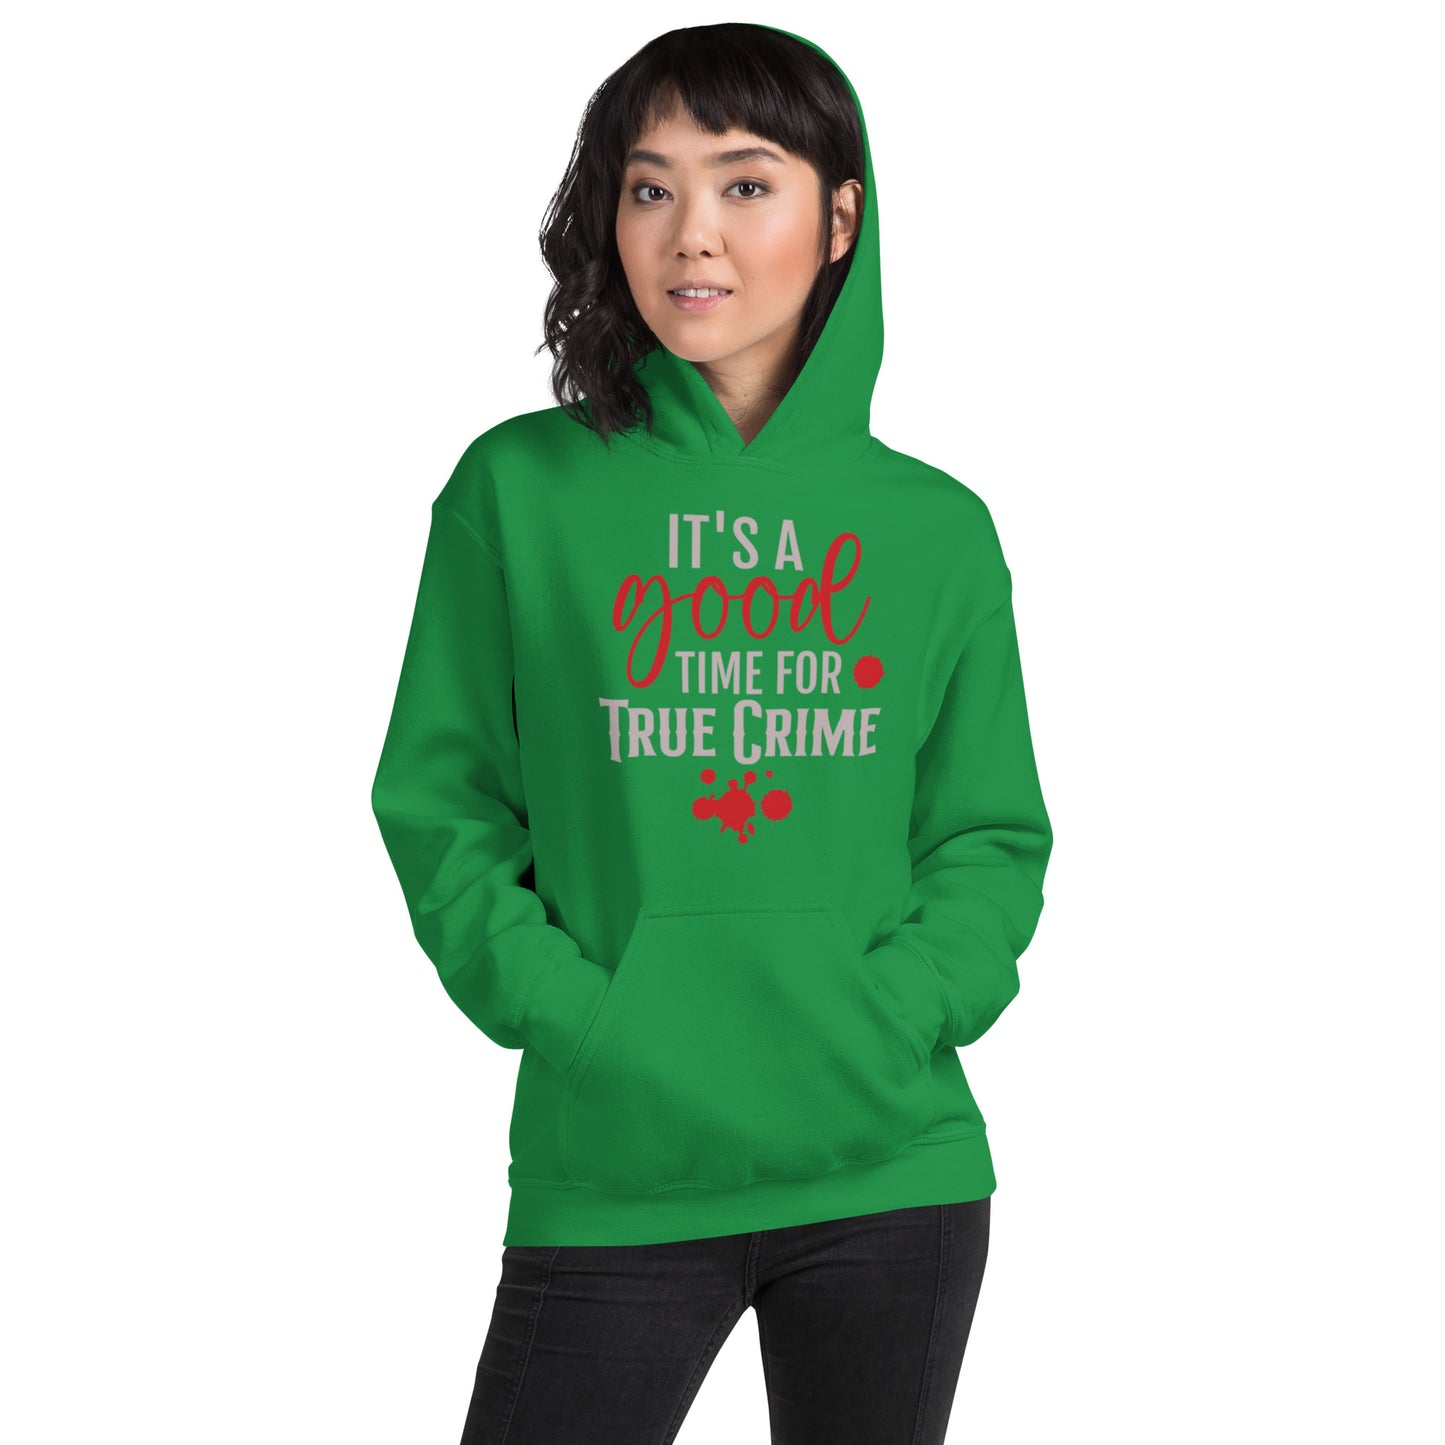 It's a Good Time for True Crime Unisex Hoodie